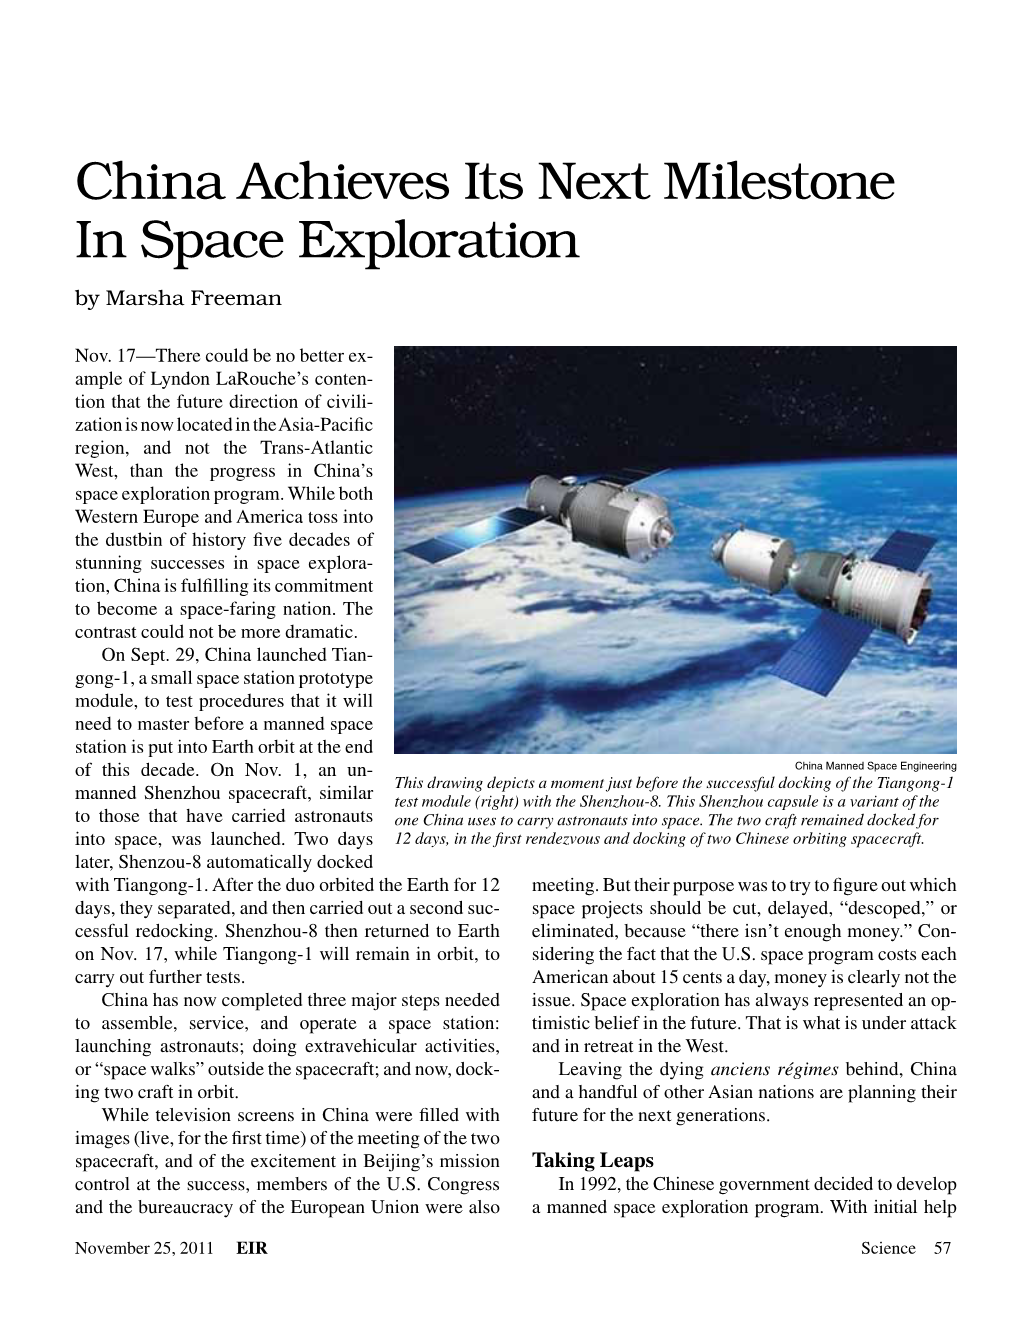 China Achieves Its Next Milestone in Space Exploration by Marsha Freeman